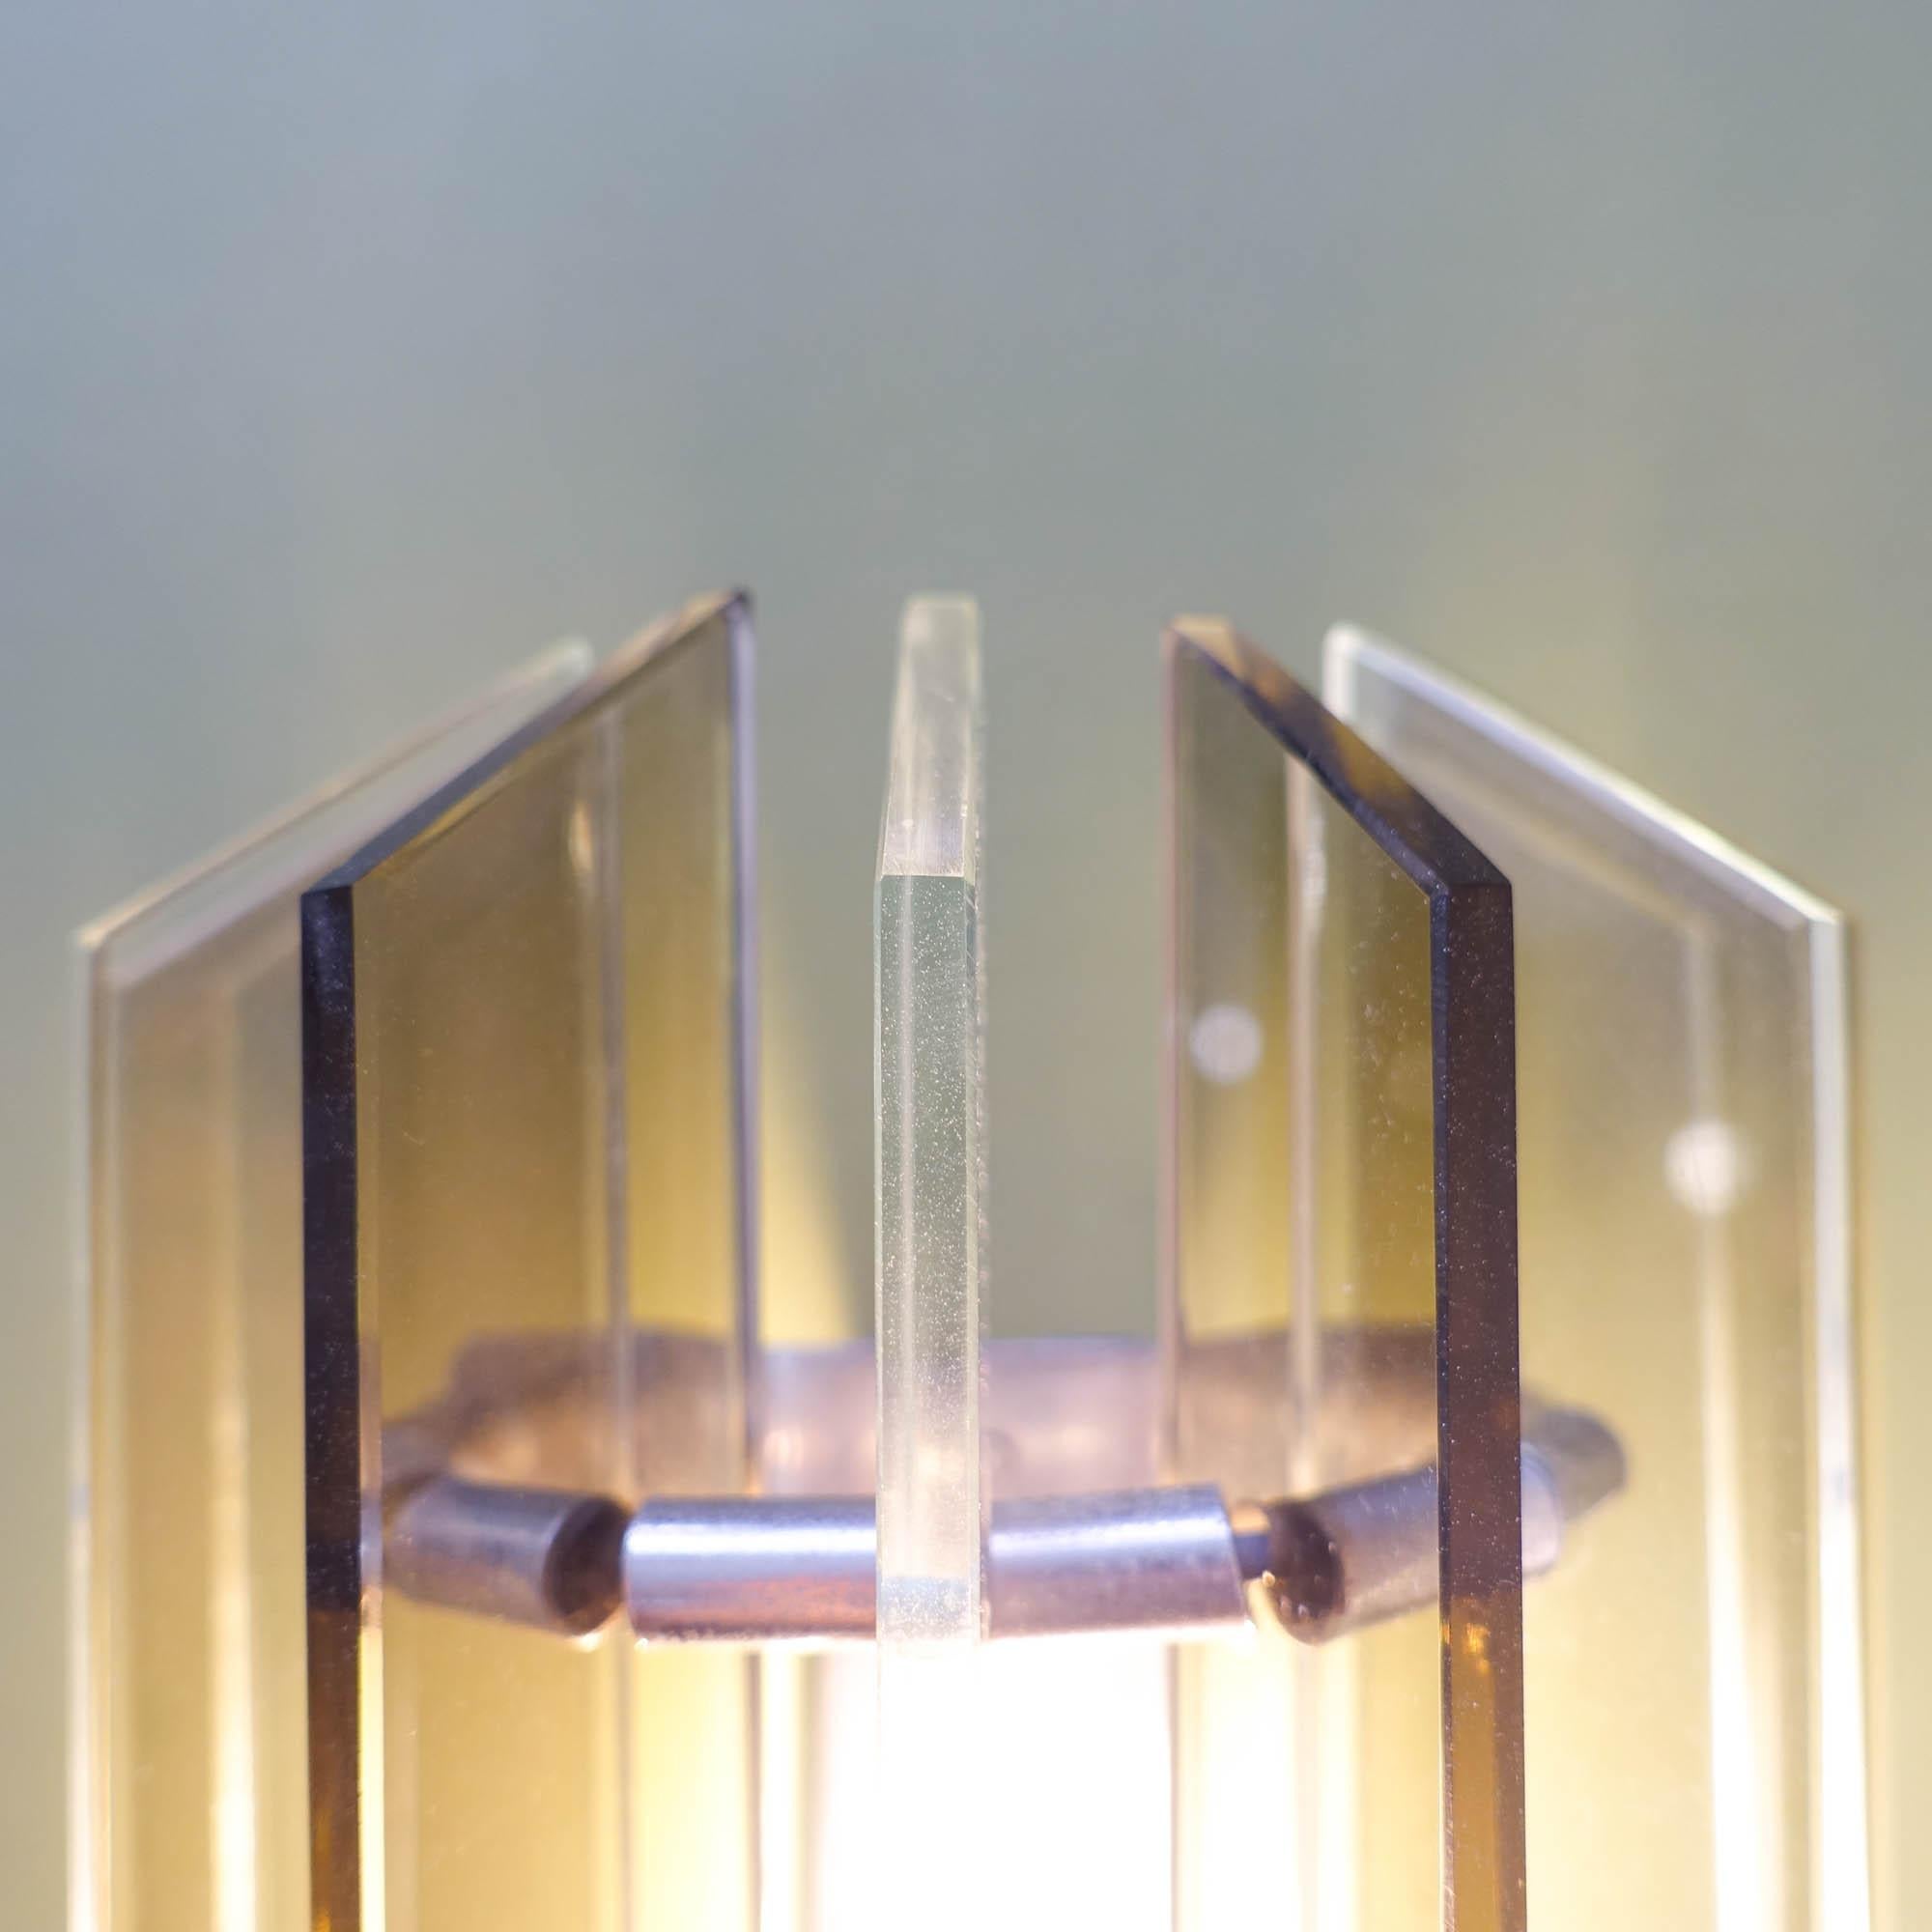 Pair of Italian Smoked and Clear Glass Sconces in the style of Veca, 1970s For Sale 8